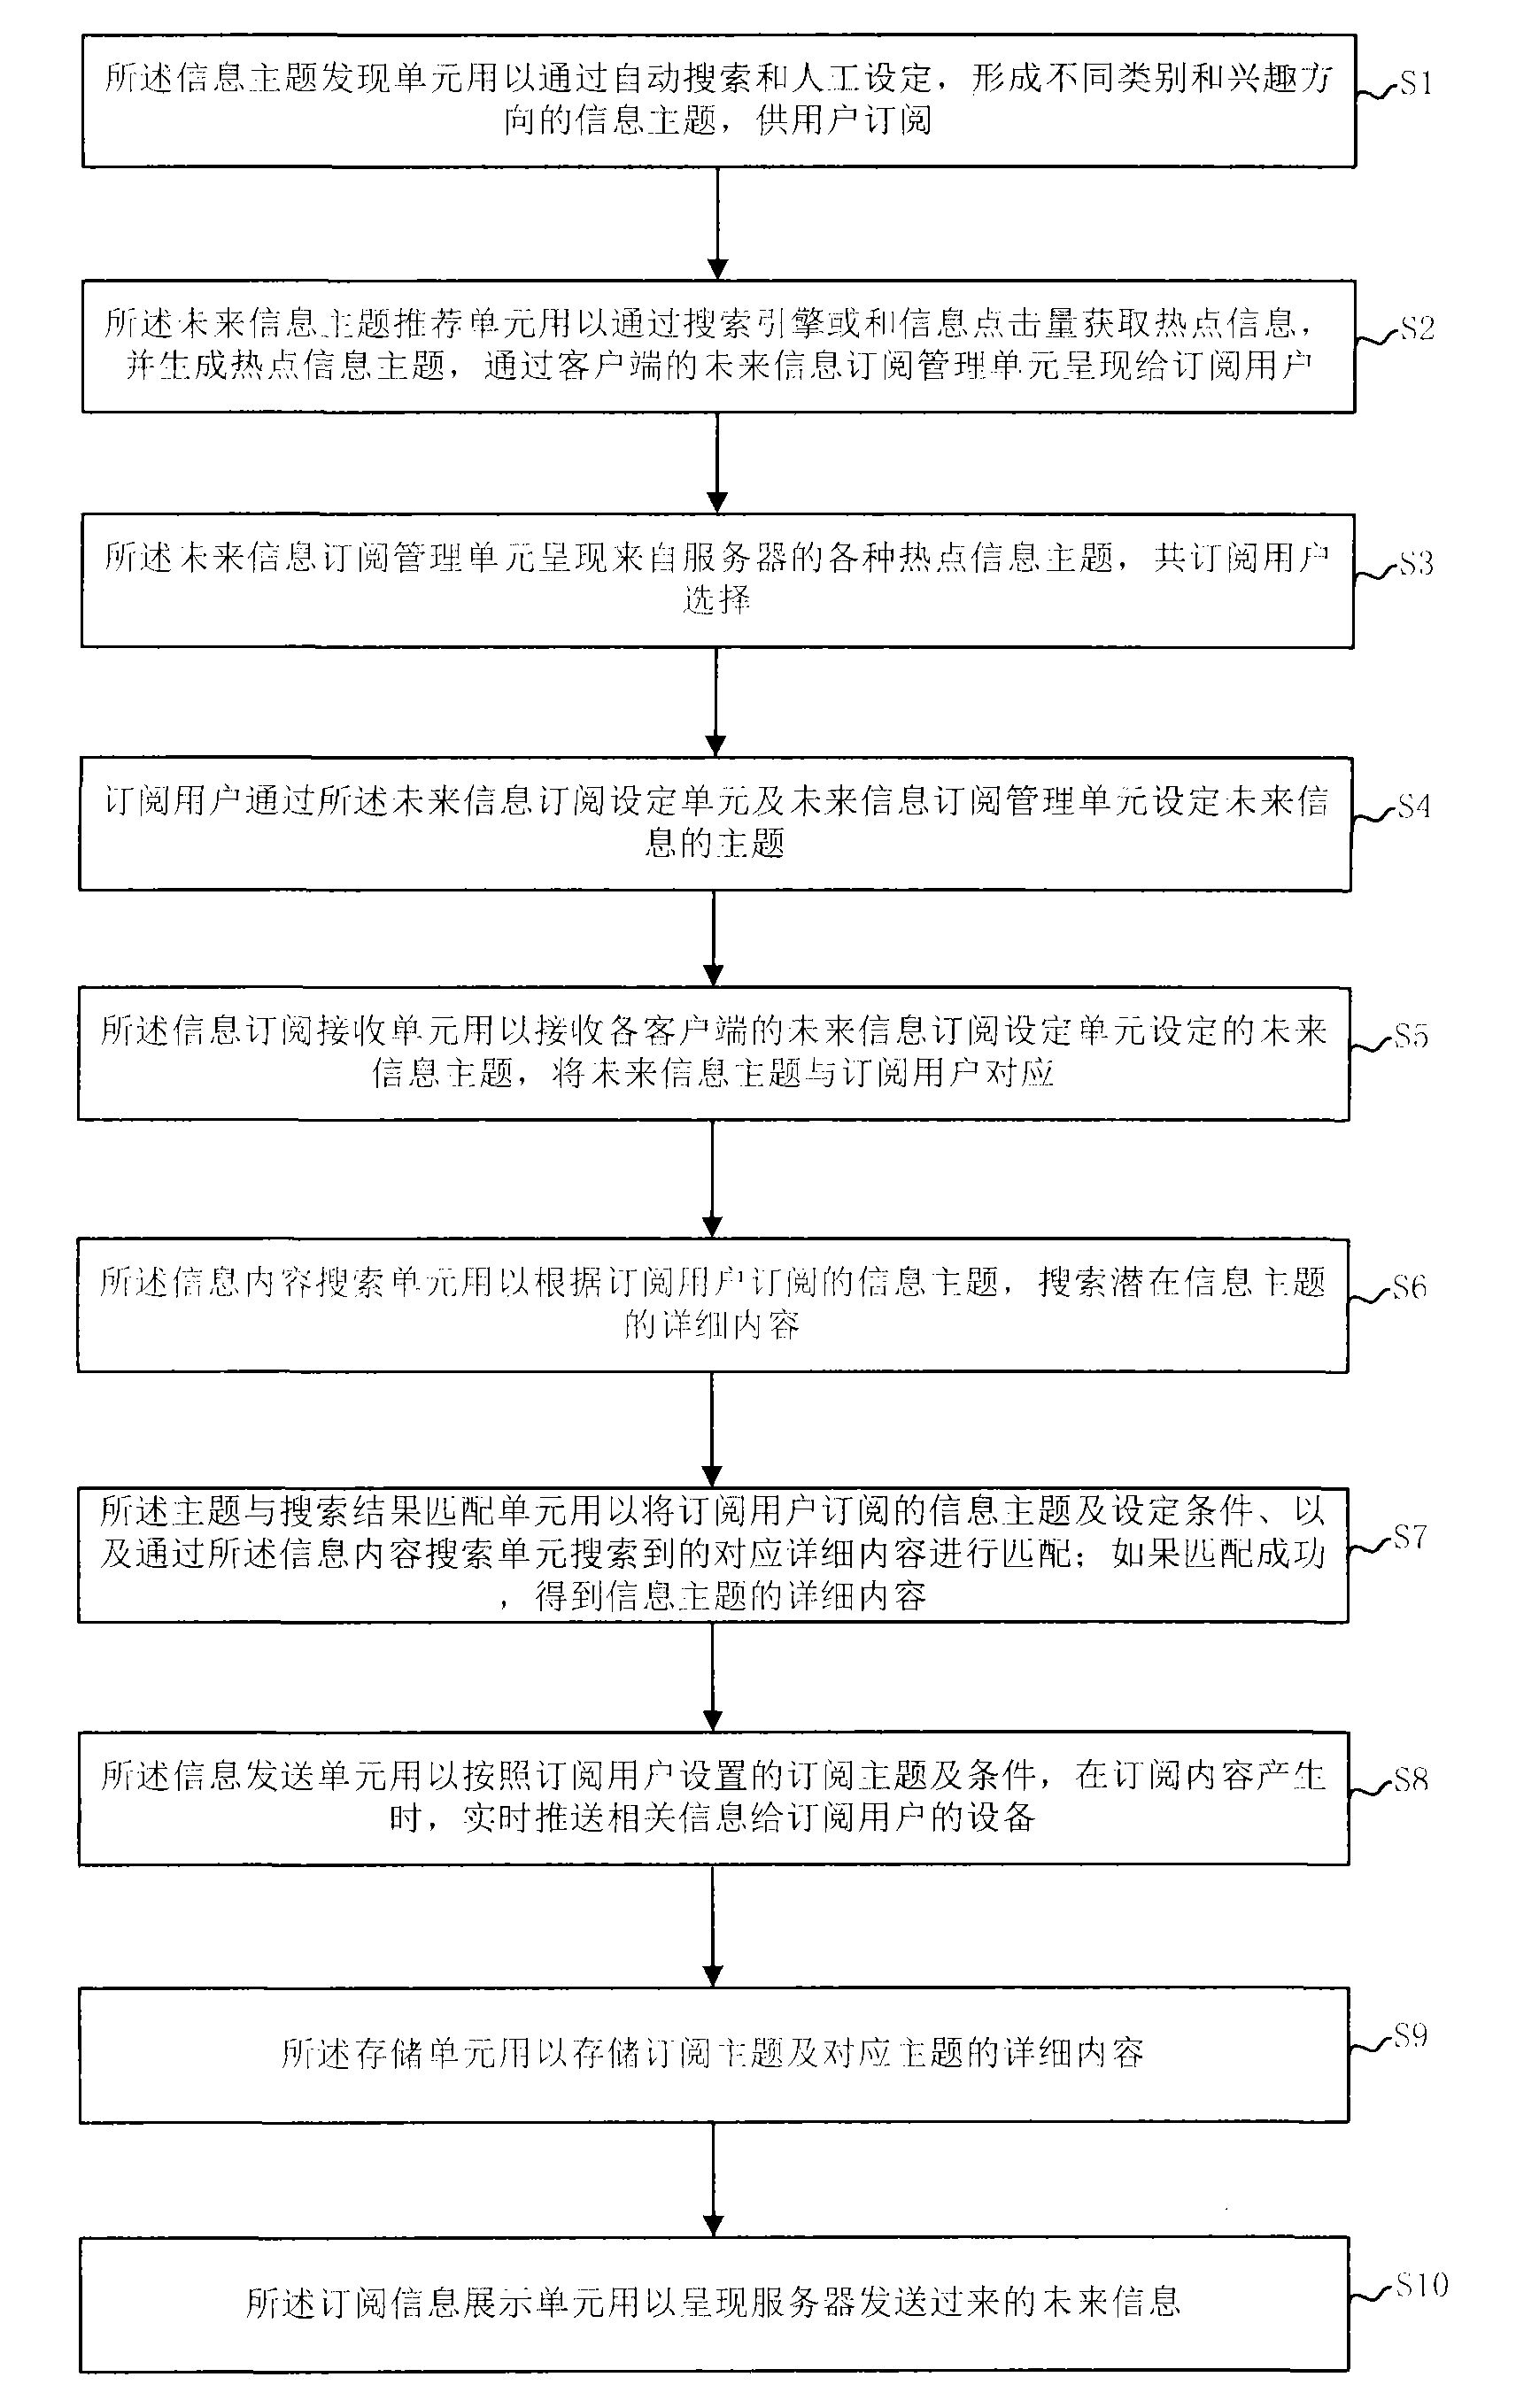 System and method for obtaining future information